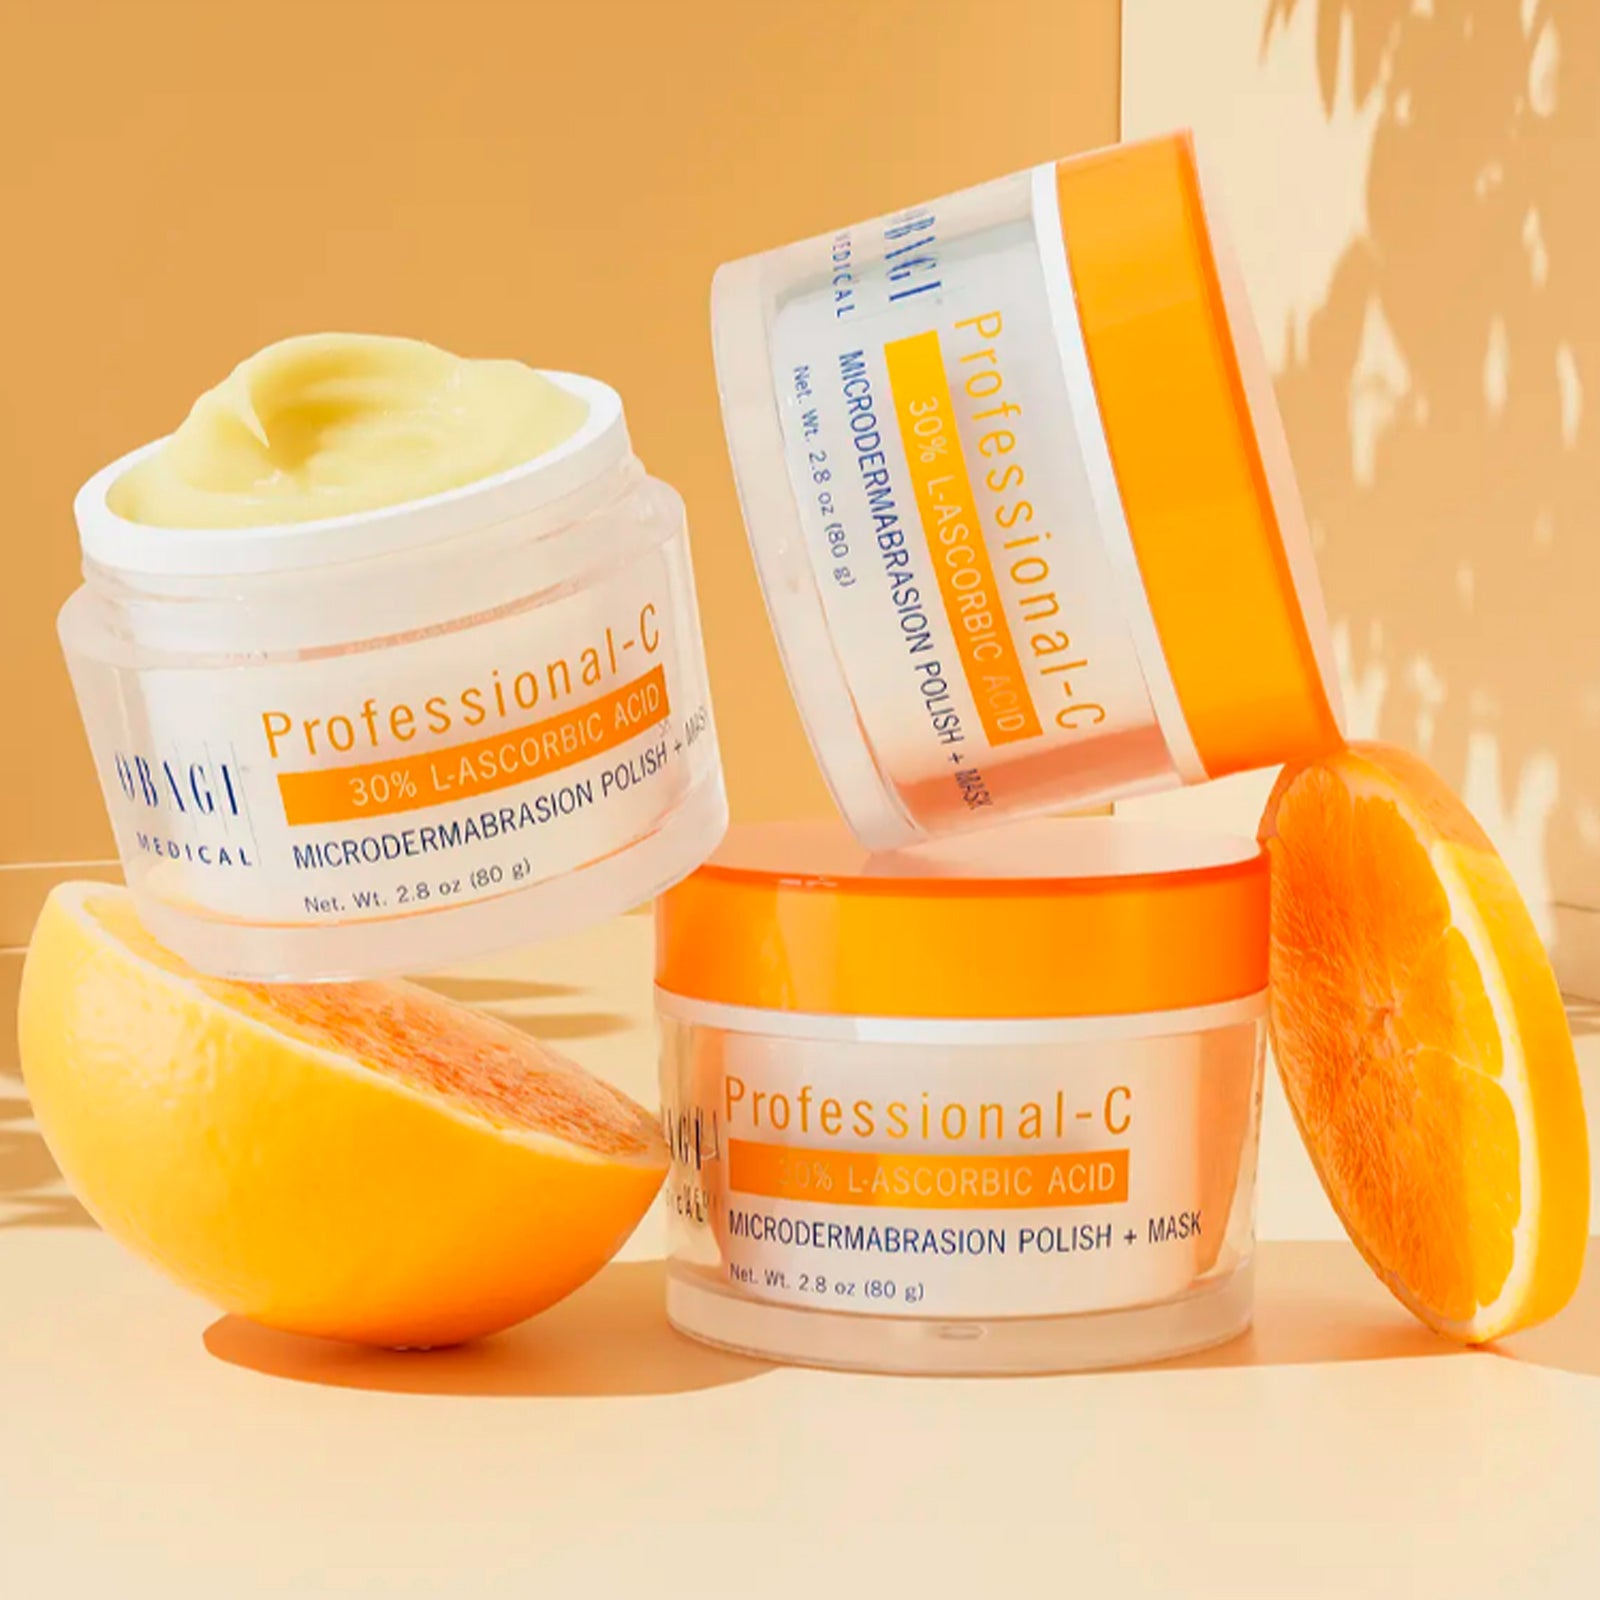 Obagi Medical Professional C Microdermabrasion Mask + Polish from MyExceptionalSkinCare.com with Oranges